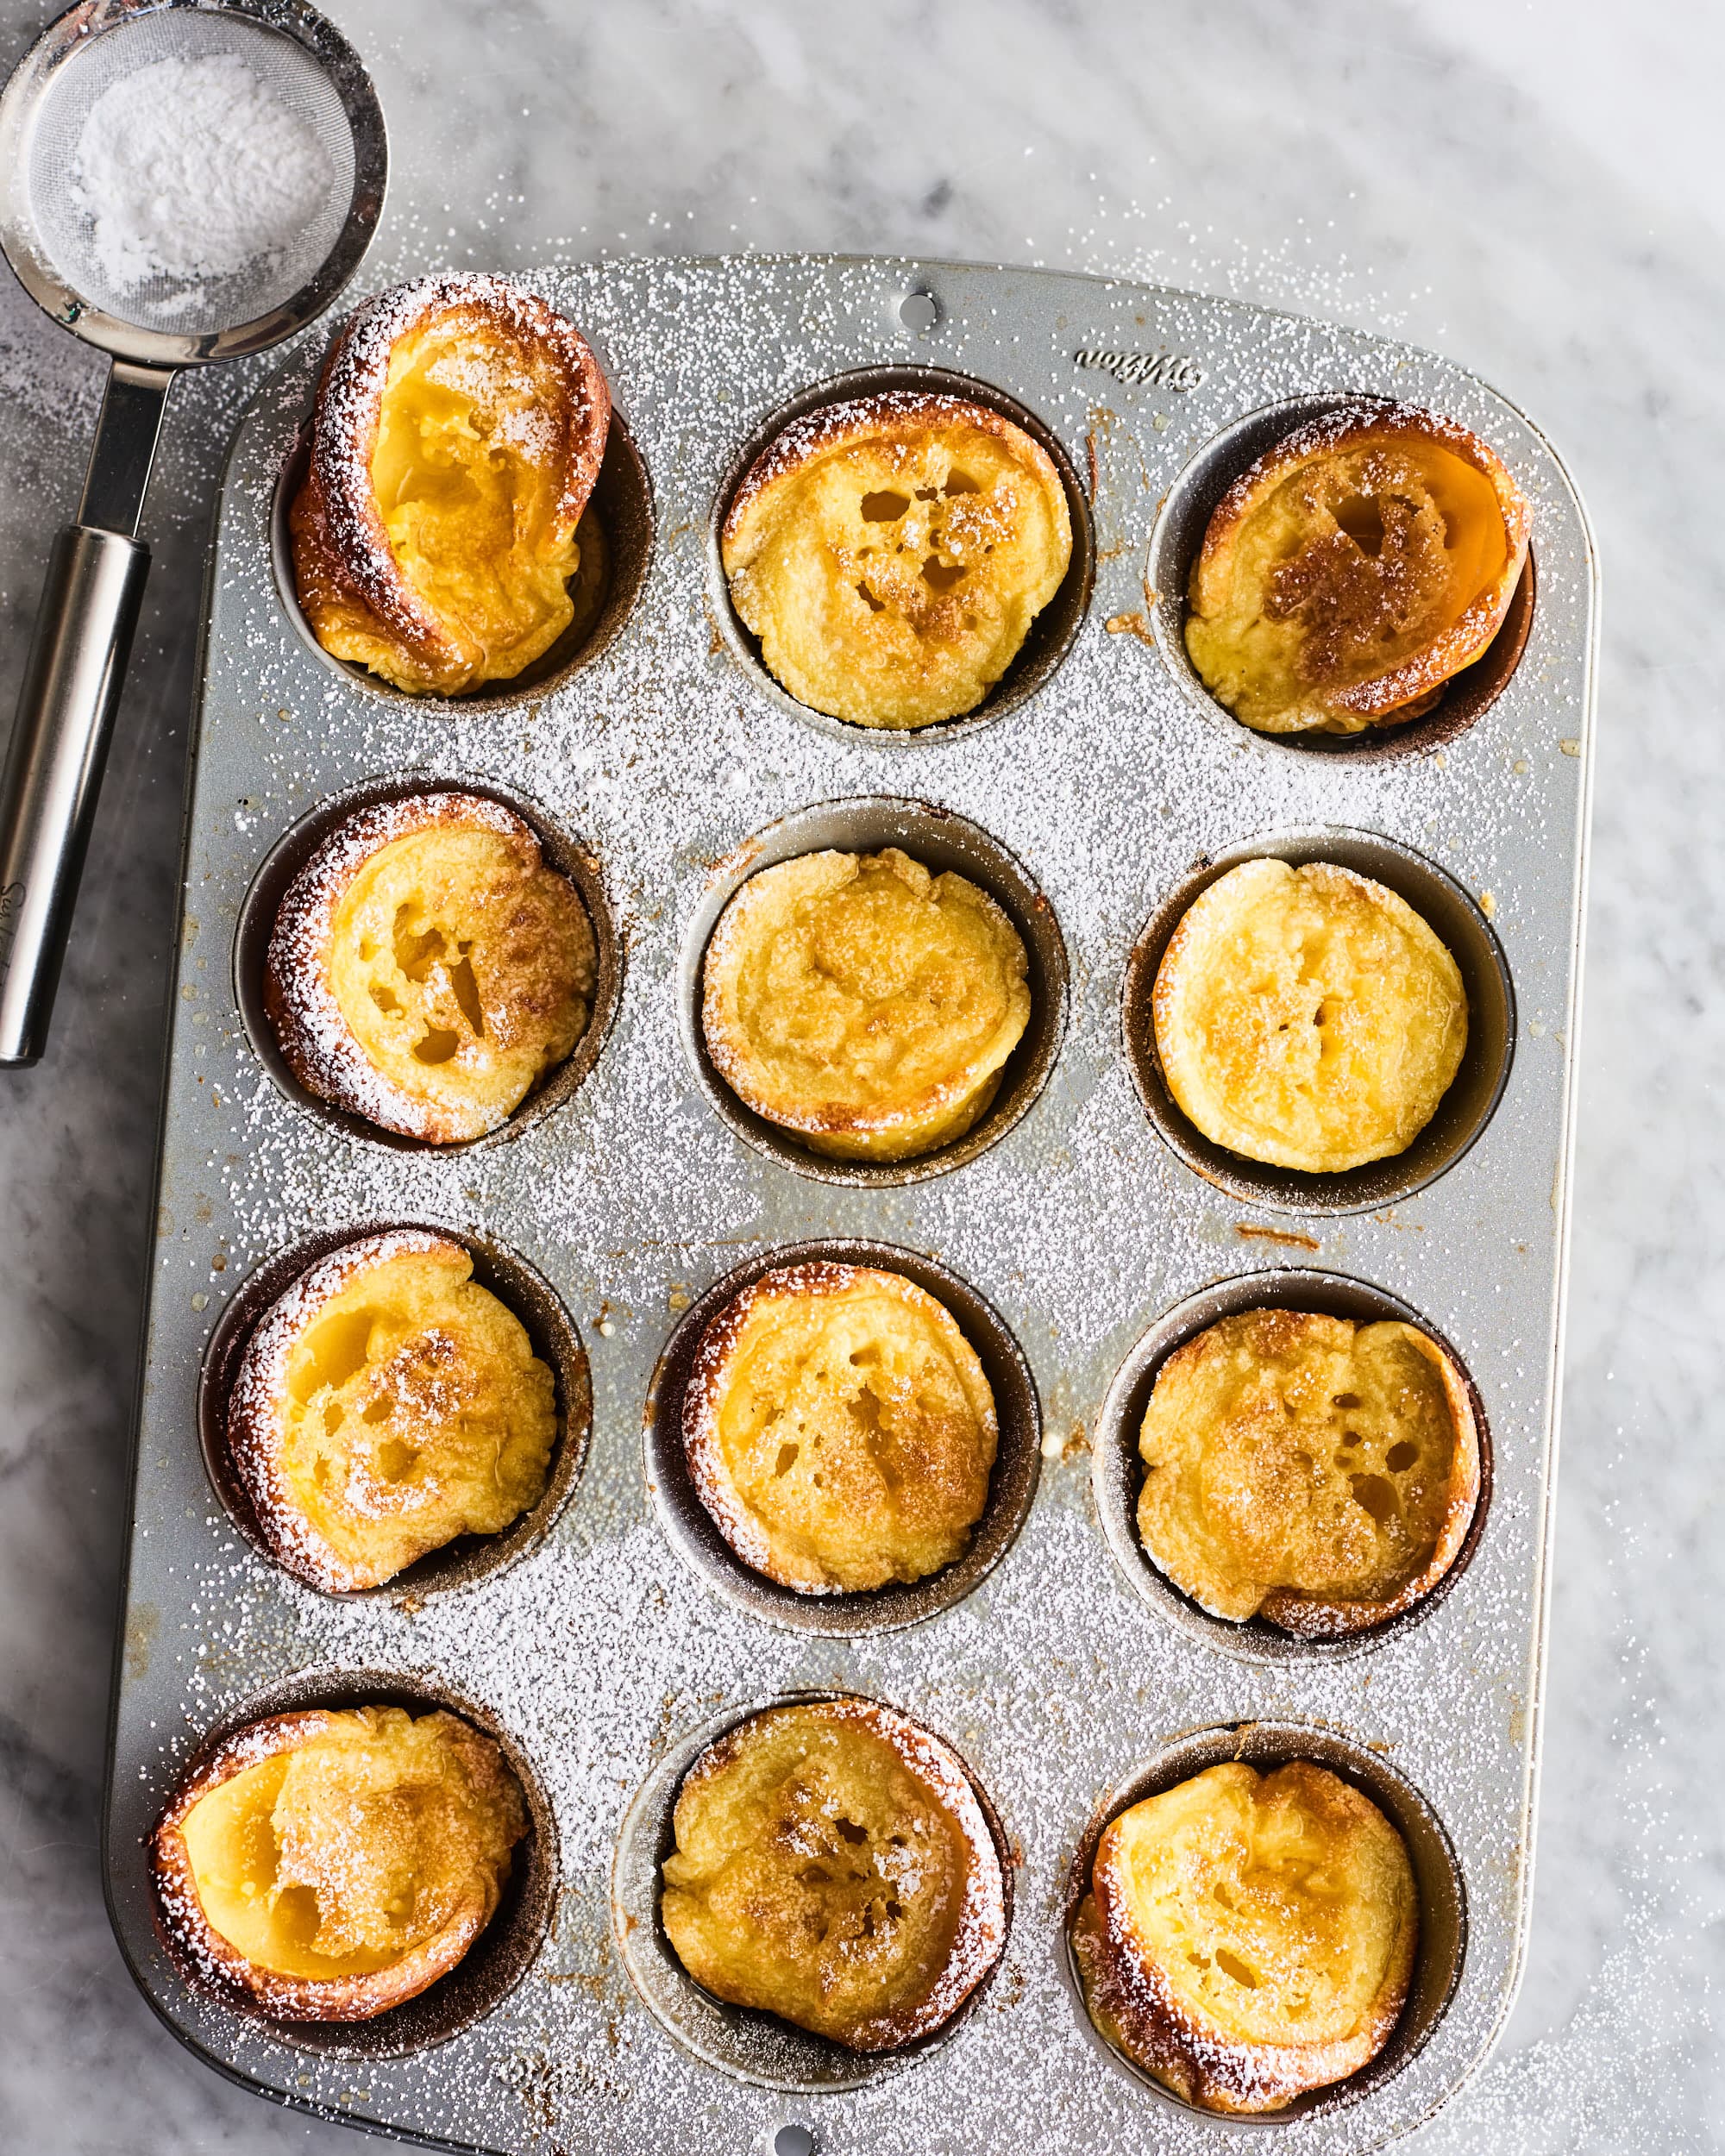 Find muffin pan ideas for small and medium-sized toaster ovens